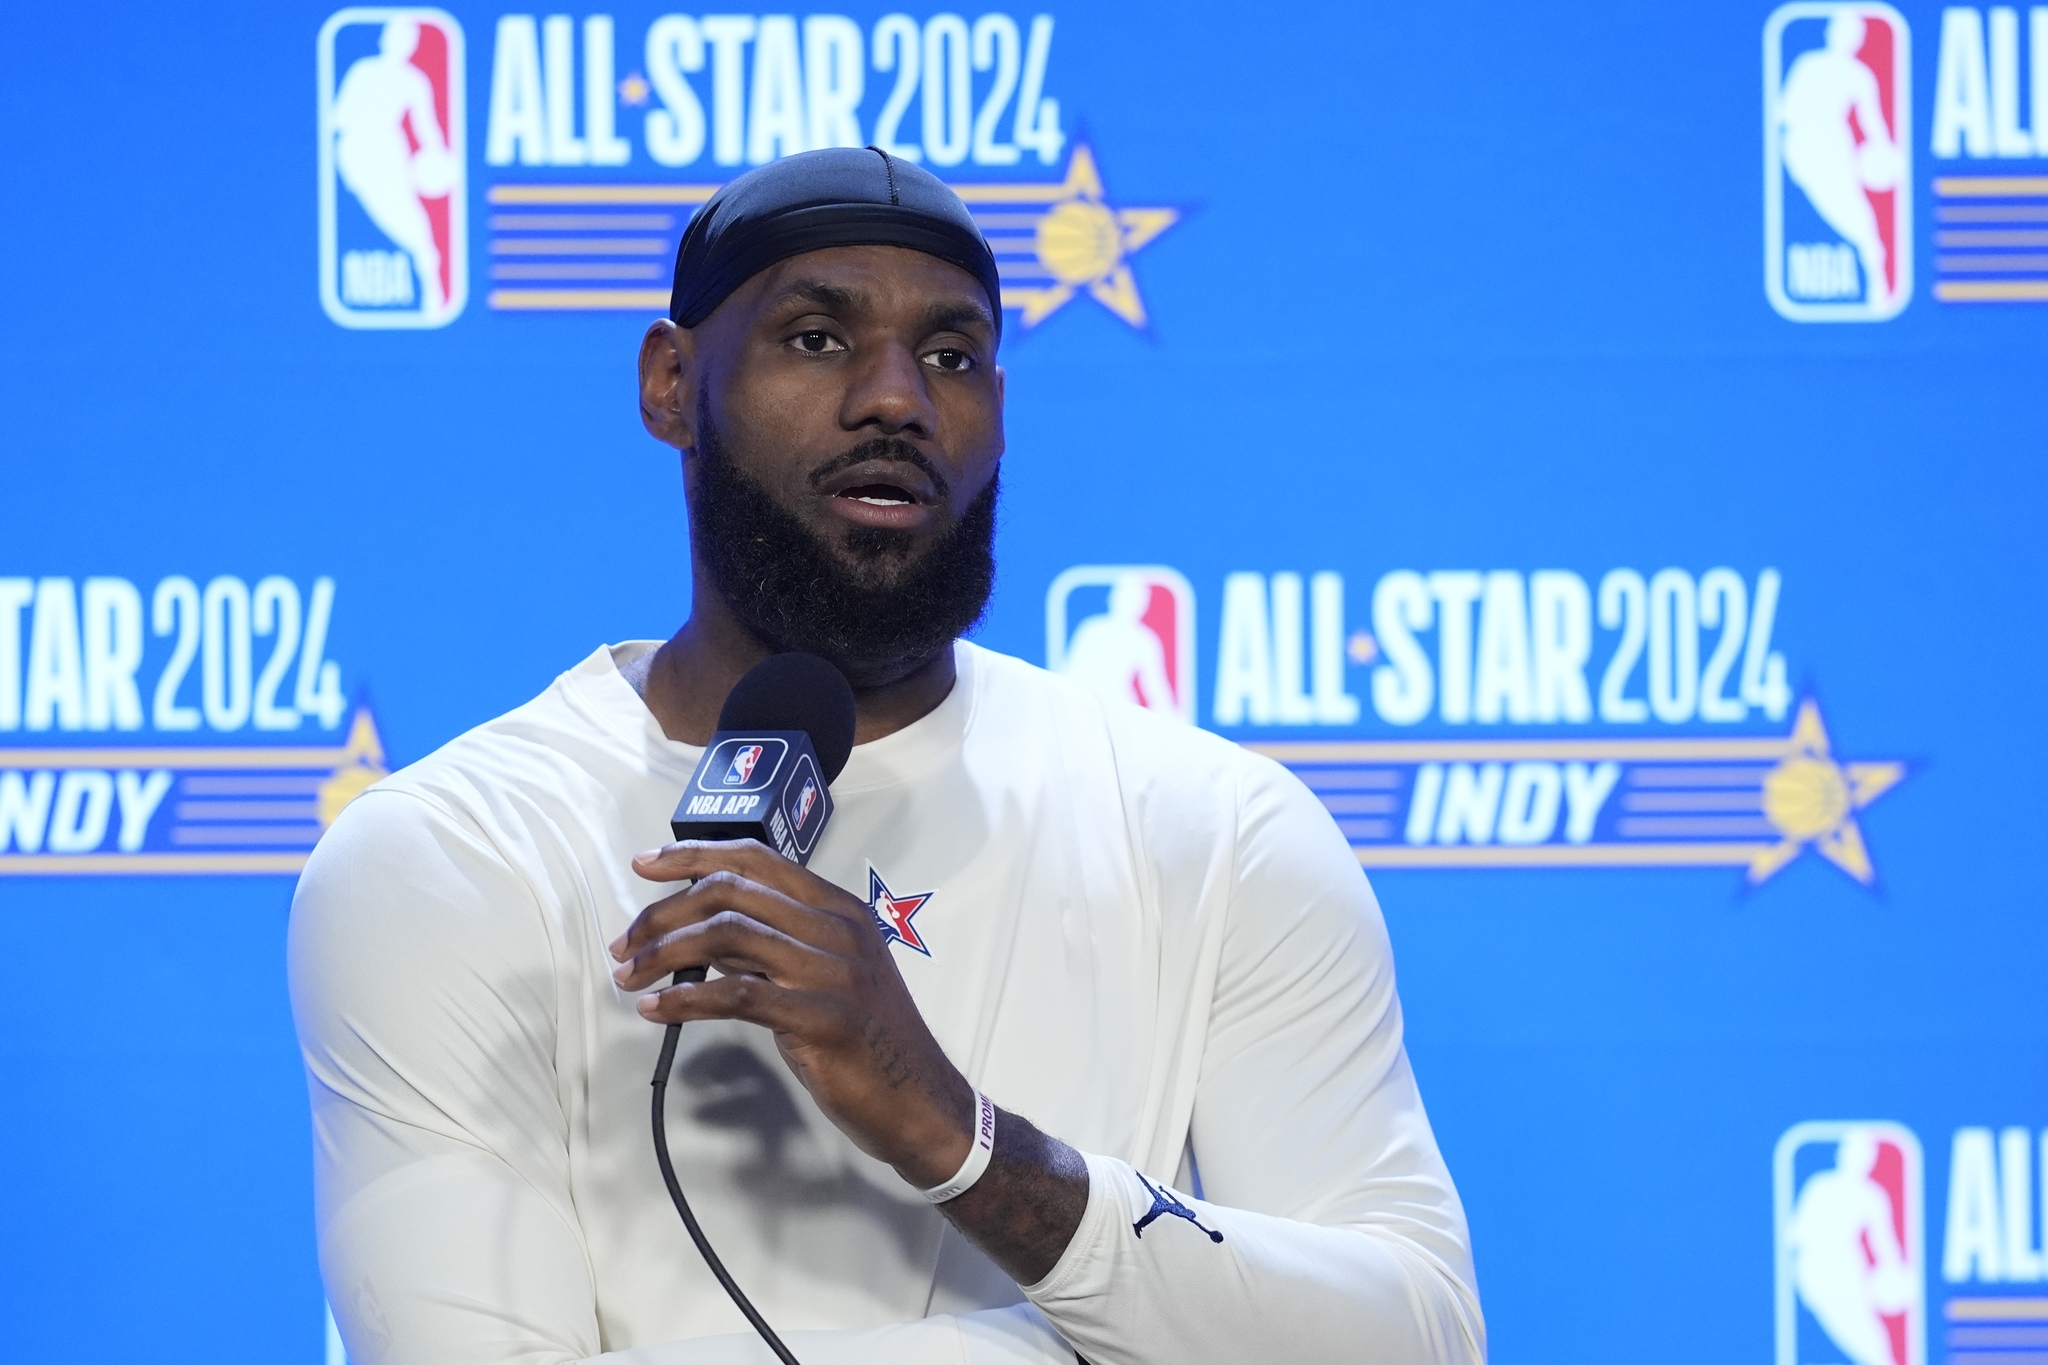 Los Angeles Lakers LeBron James speaks during a news conference